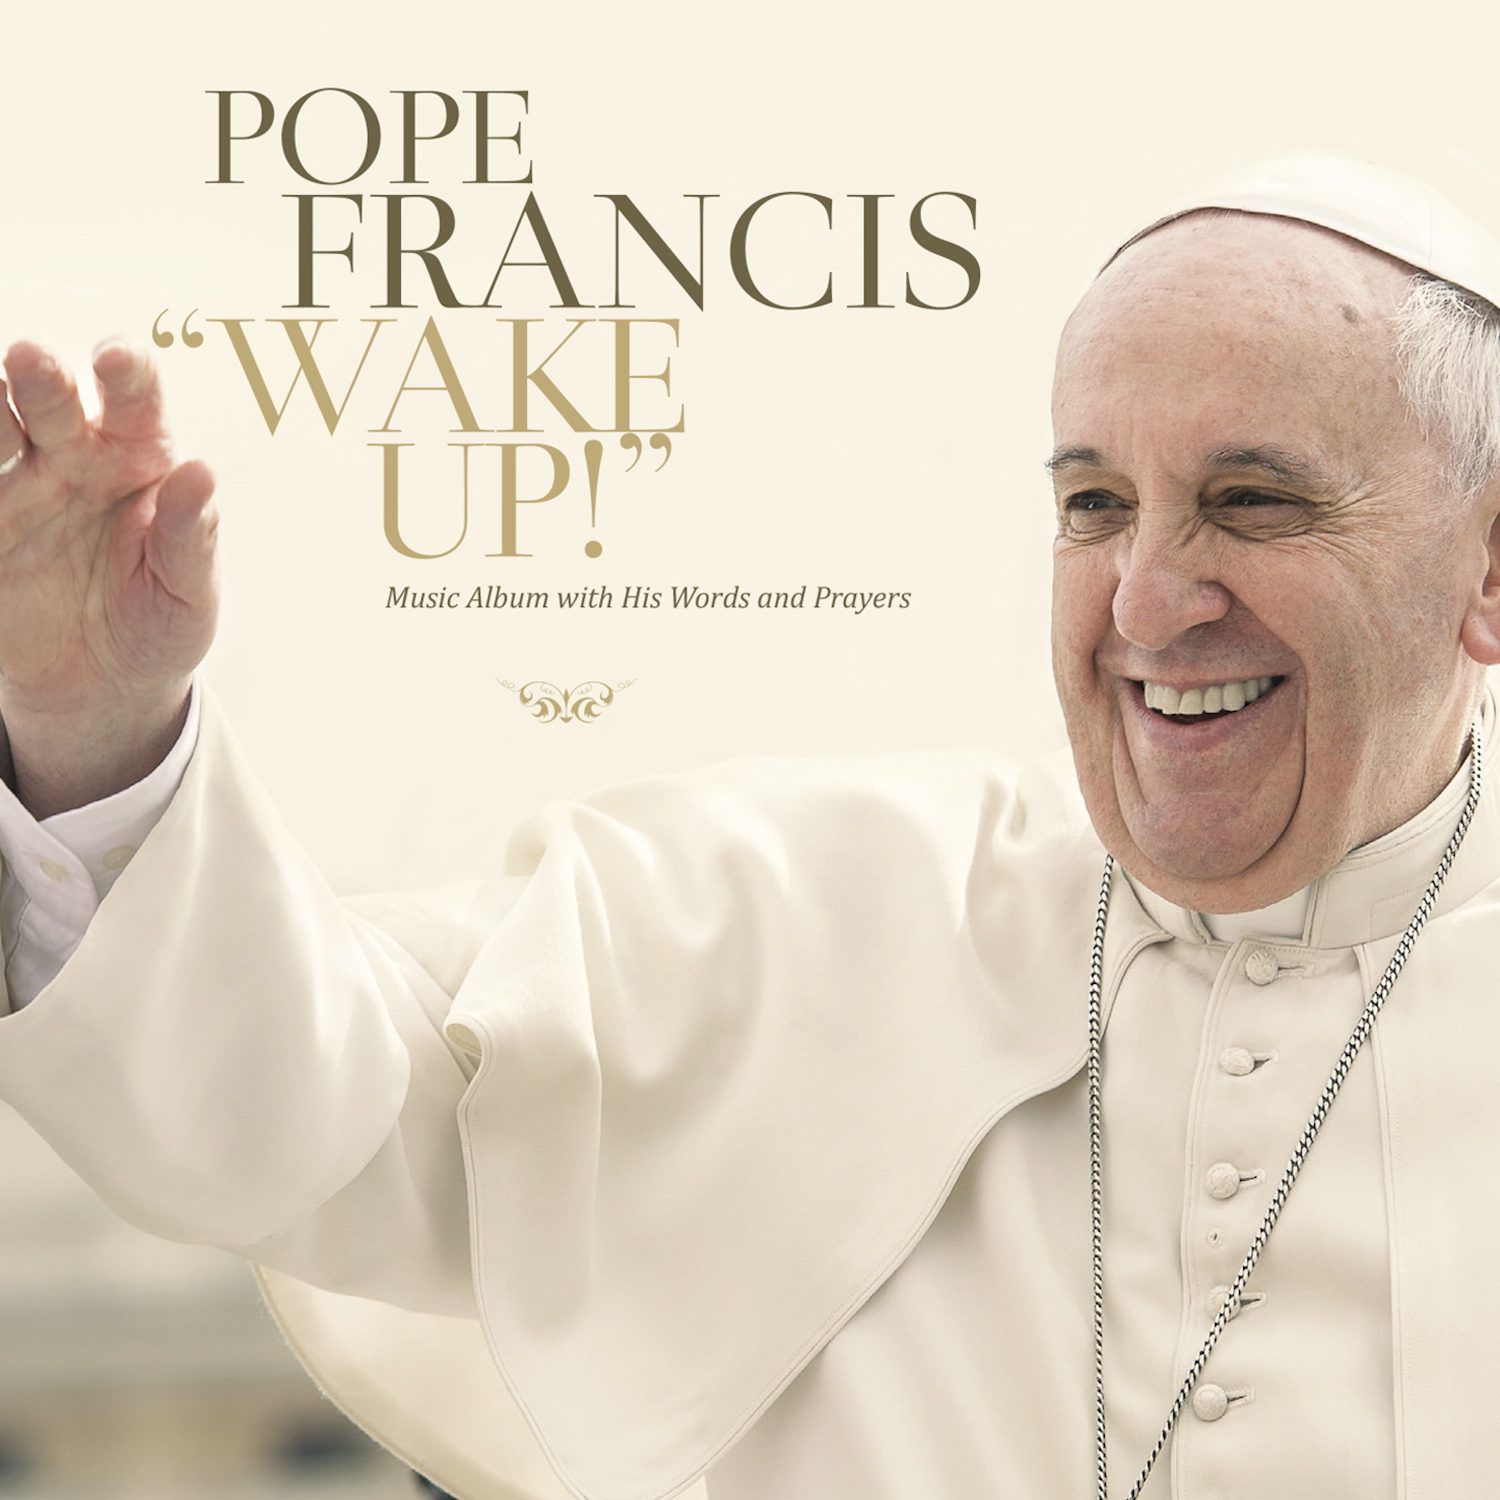 &quot;Wake Up!&quot; features extracts from Pope Francis&#039; speeches in various languages, including English, Italian, Spanish and Portuguese.